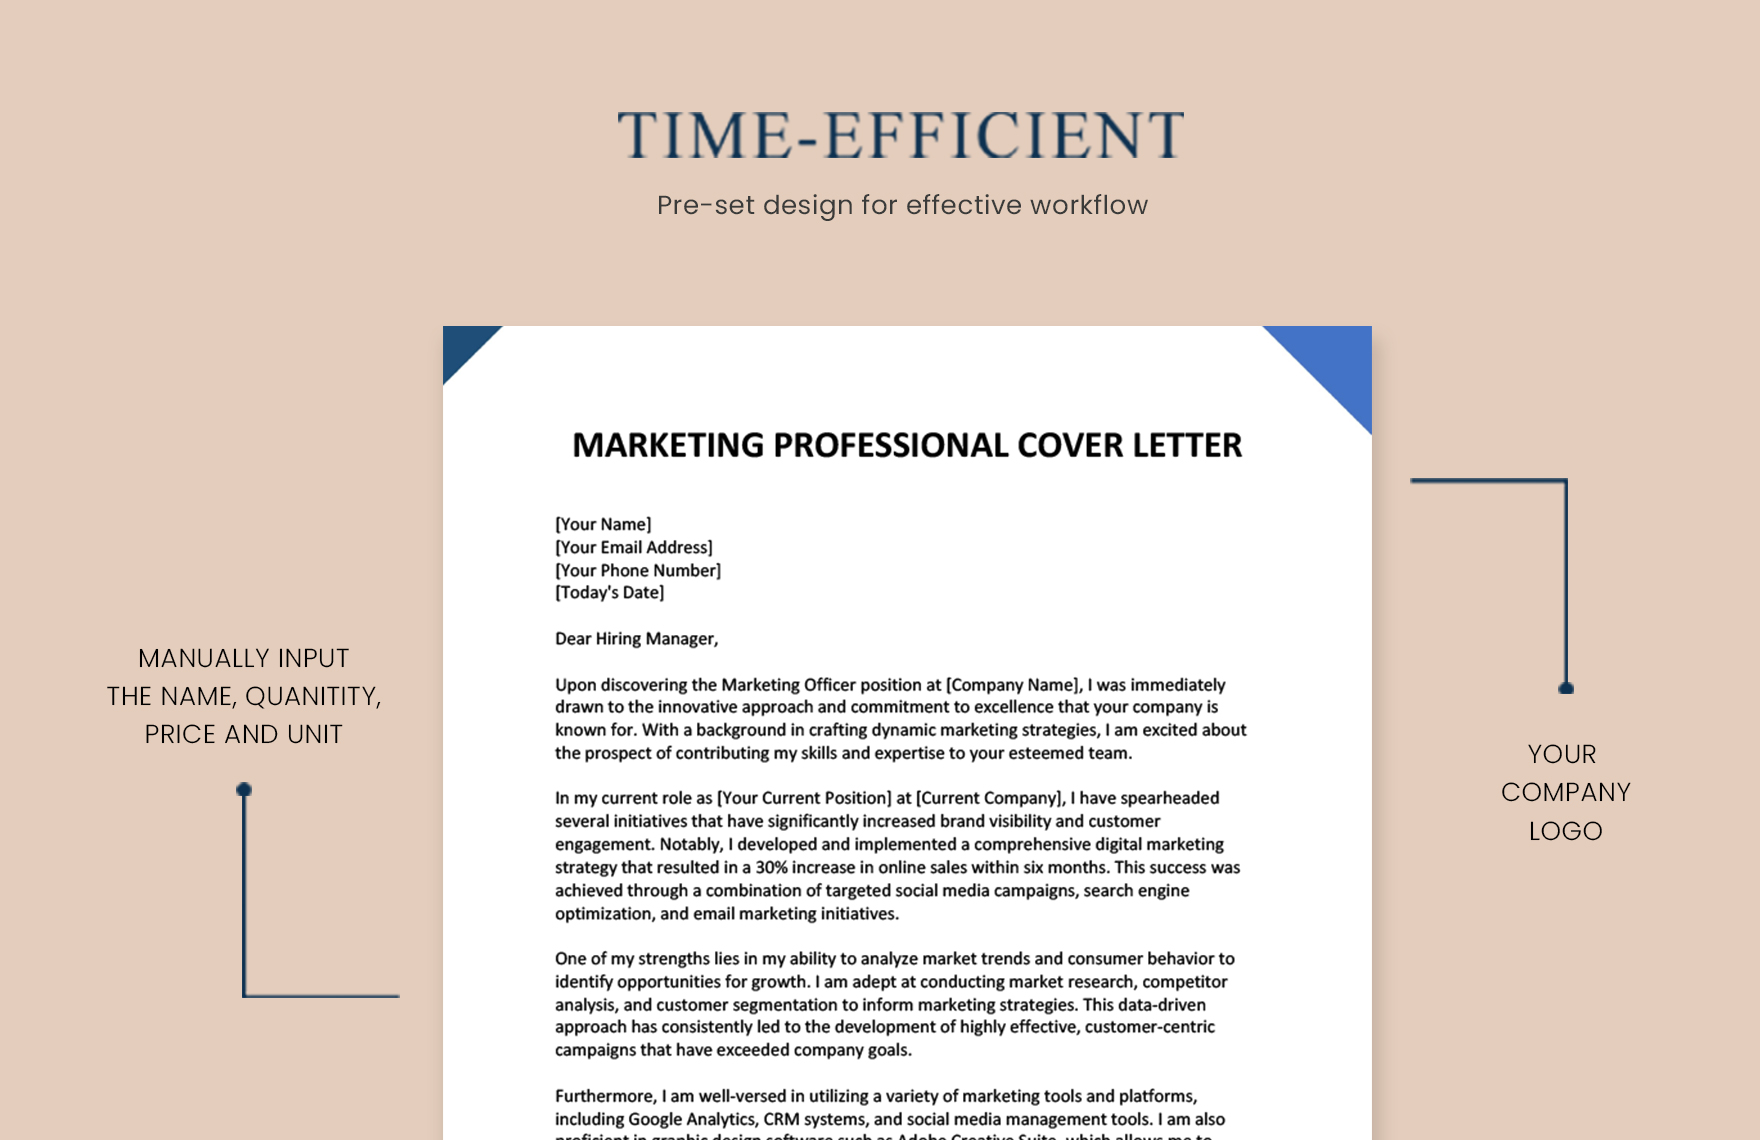 Marketing Professional Cover Letter